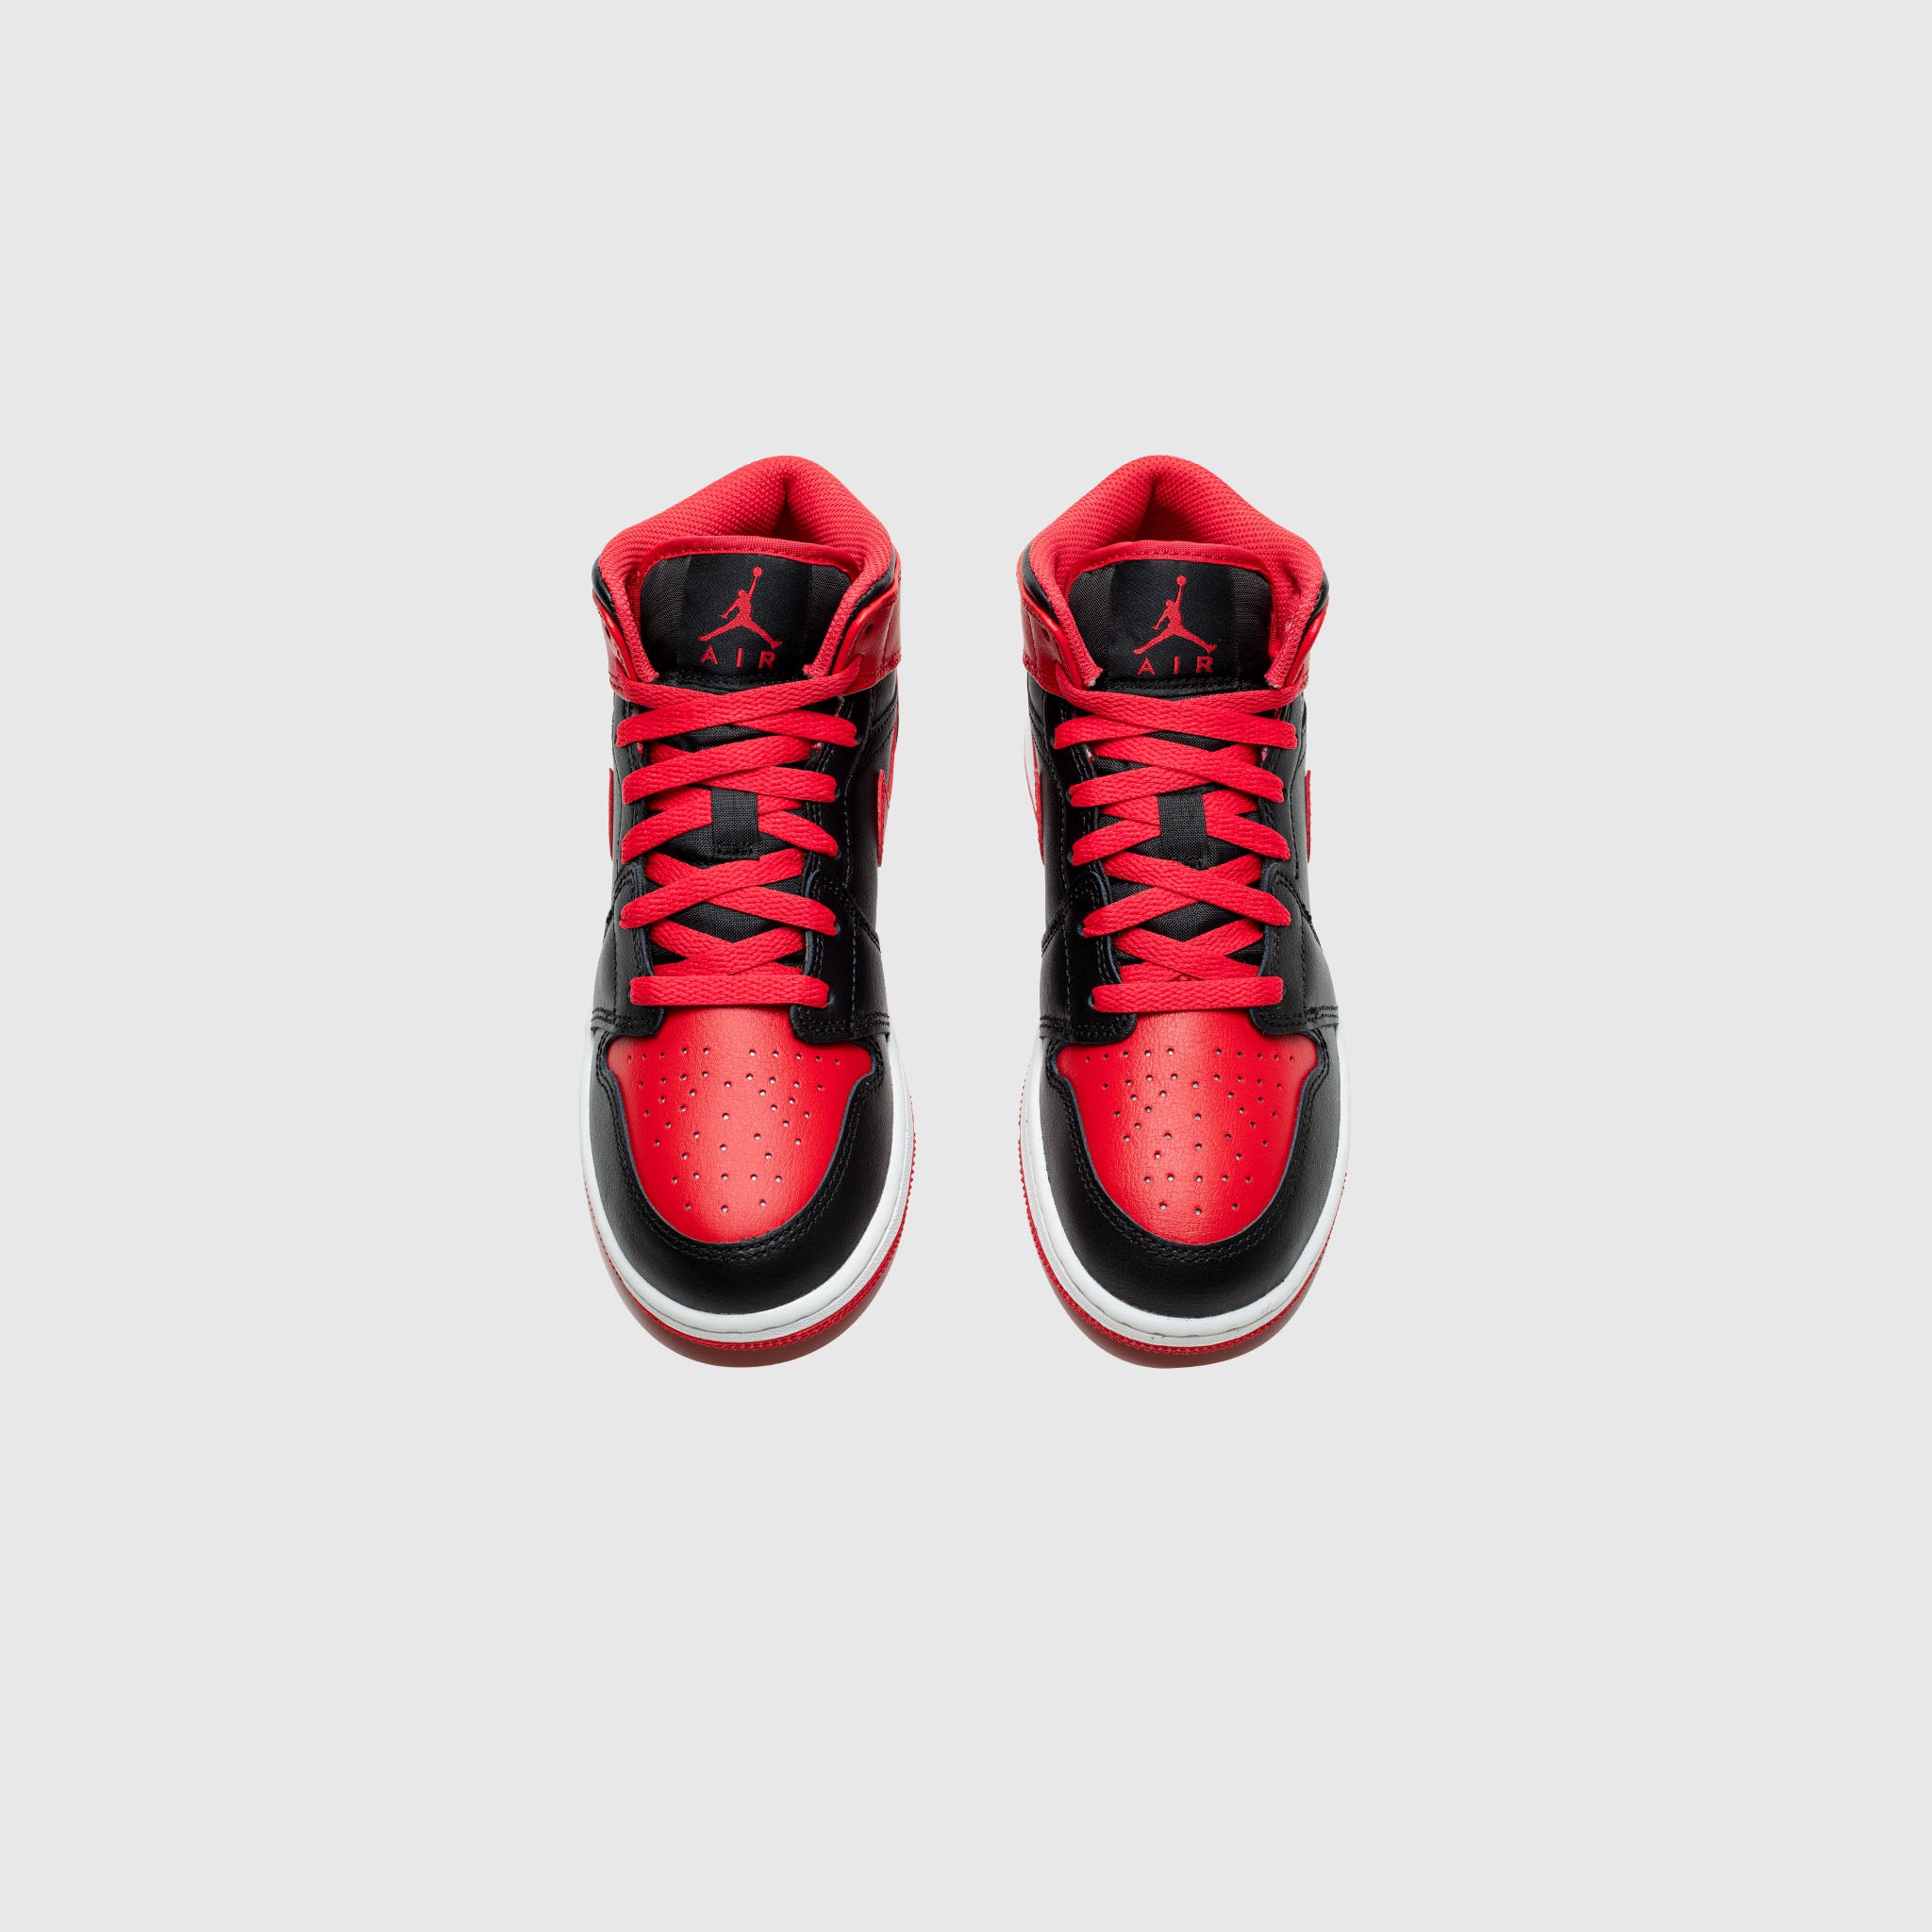 posterior piel padre AIR JORDAN 1 MID SE (GS) "FIRE RED" – PACKER SHOES